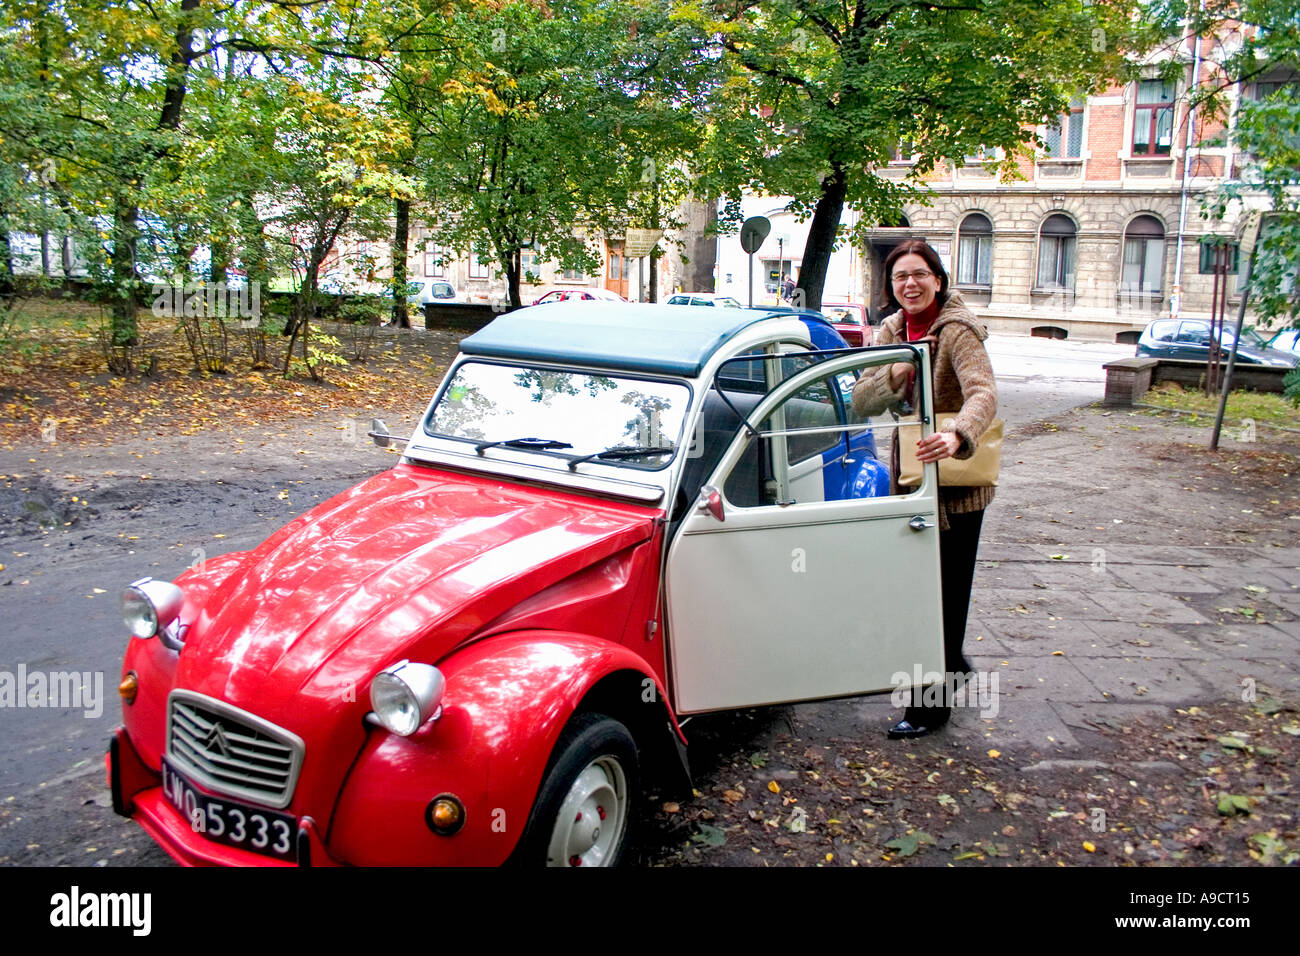 Owner stepping into beautiful red white and blue Citroen 2CV or French Deux Chevaux auto in courtyard. Lodz Poland Stock Photo